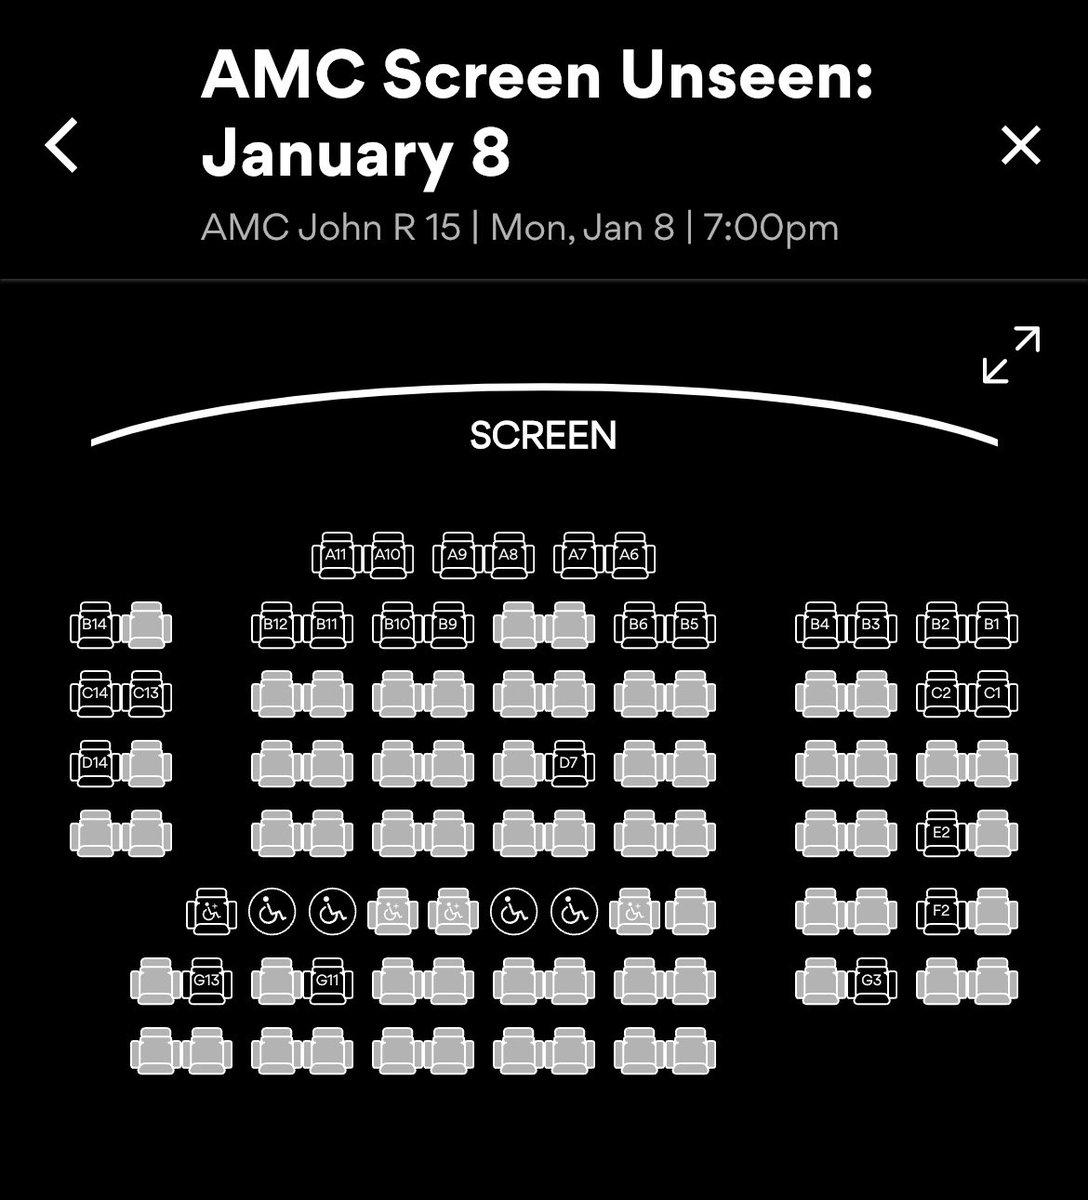 #AMCScreenUnseen is filling up fast near me! Get your seat now! 

#AMCNEVERLEAVING